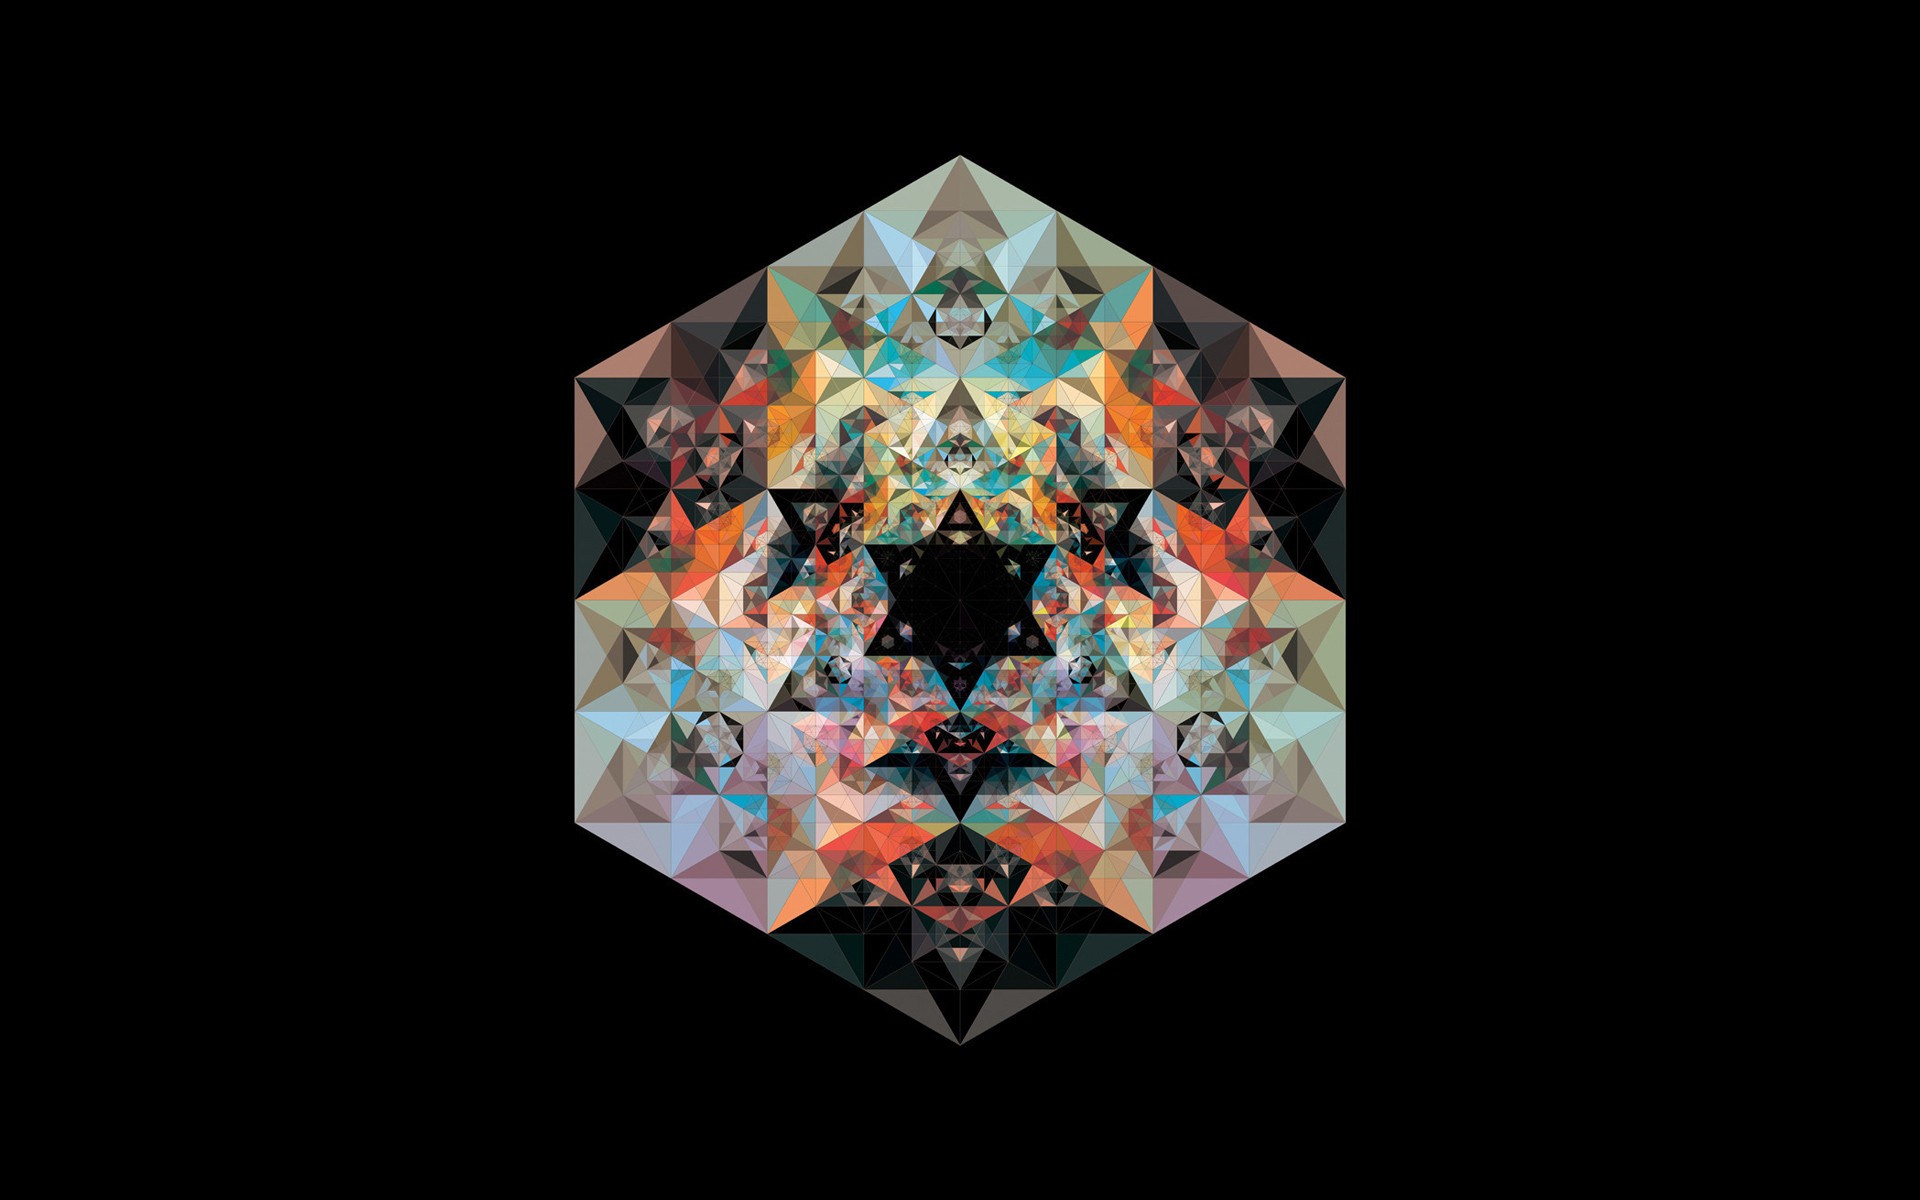 Andy Gilmore Geometry Digital Art Abstract 1920x1200